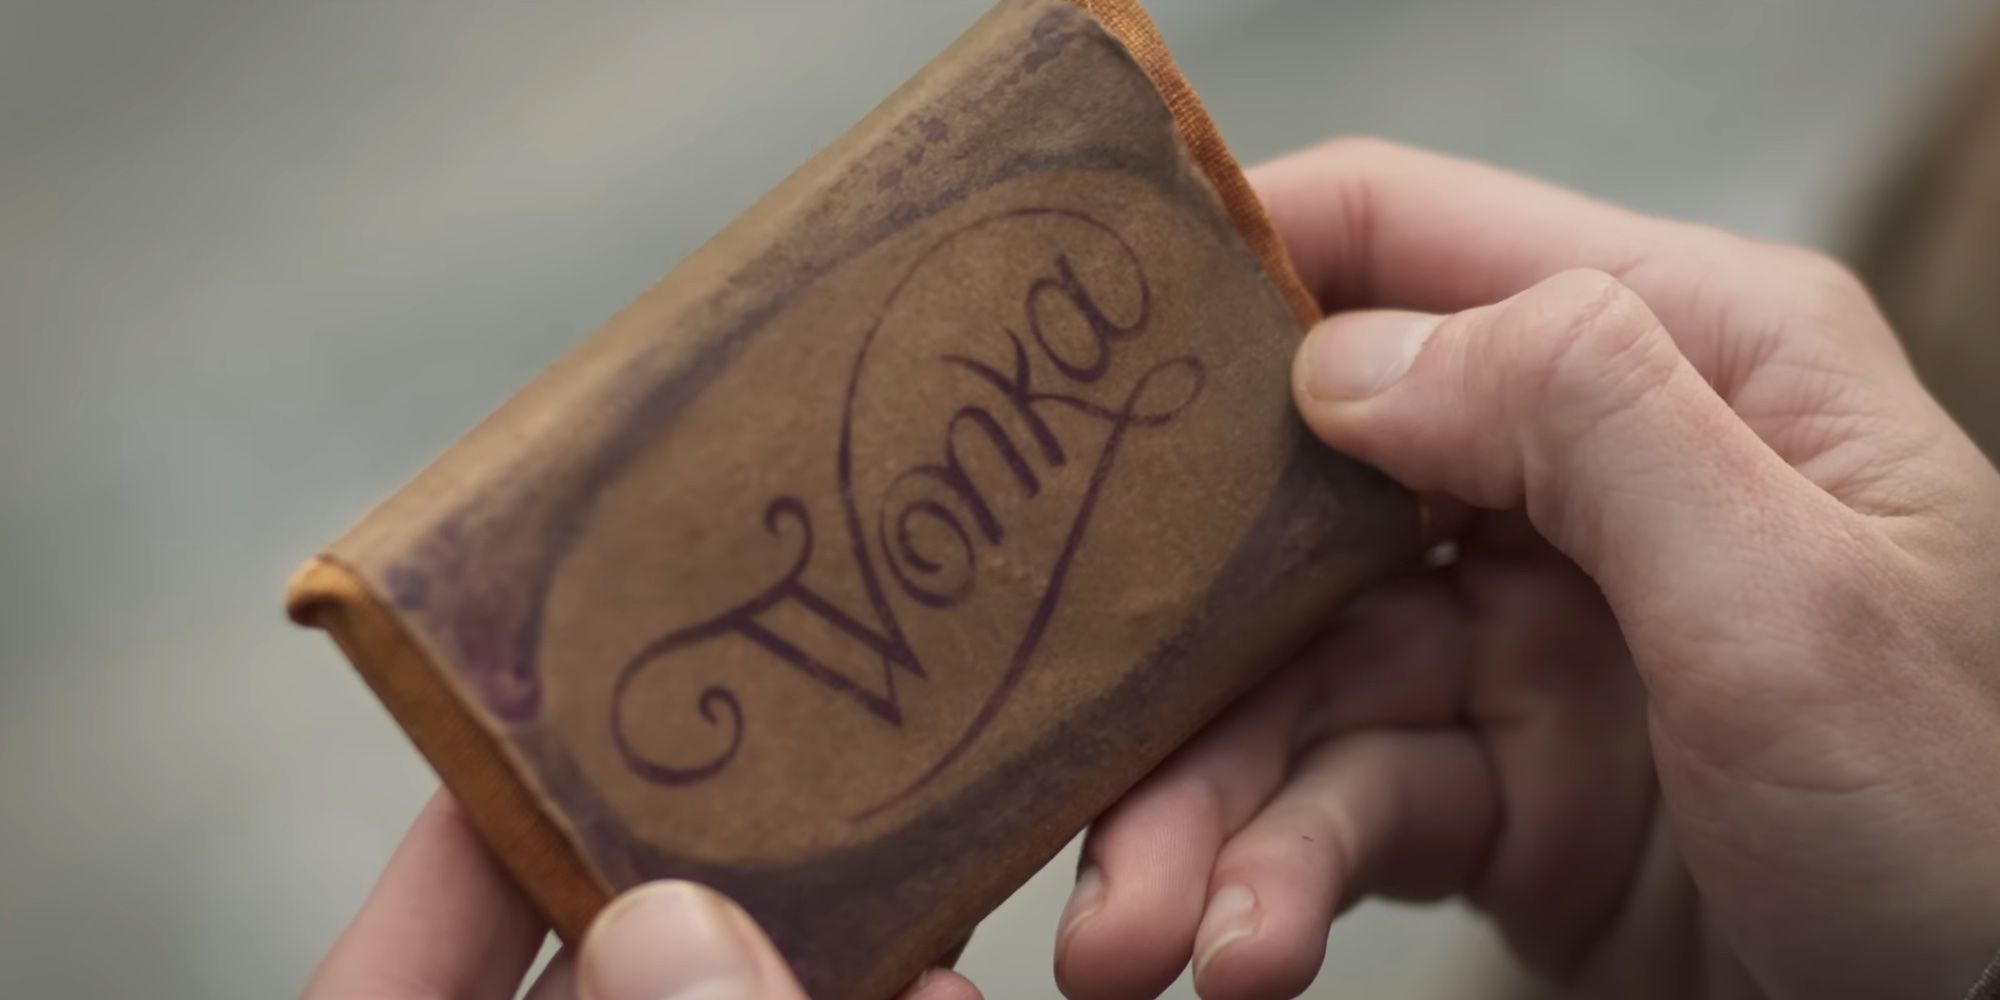 Wonka Bar: Why and when was the Nestle chocolate discontinued?